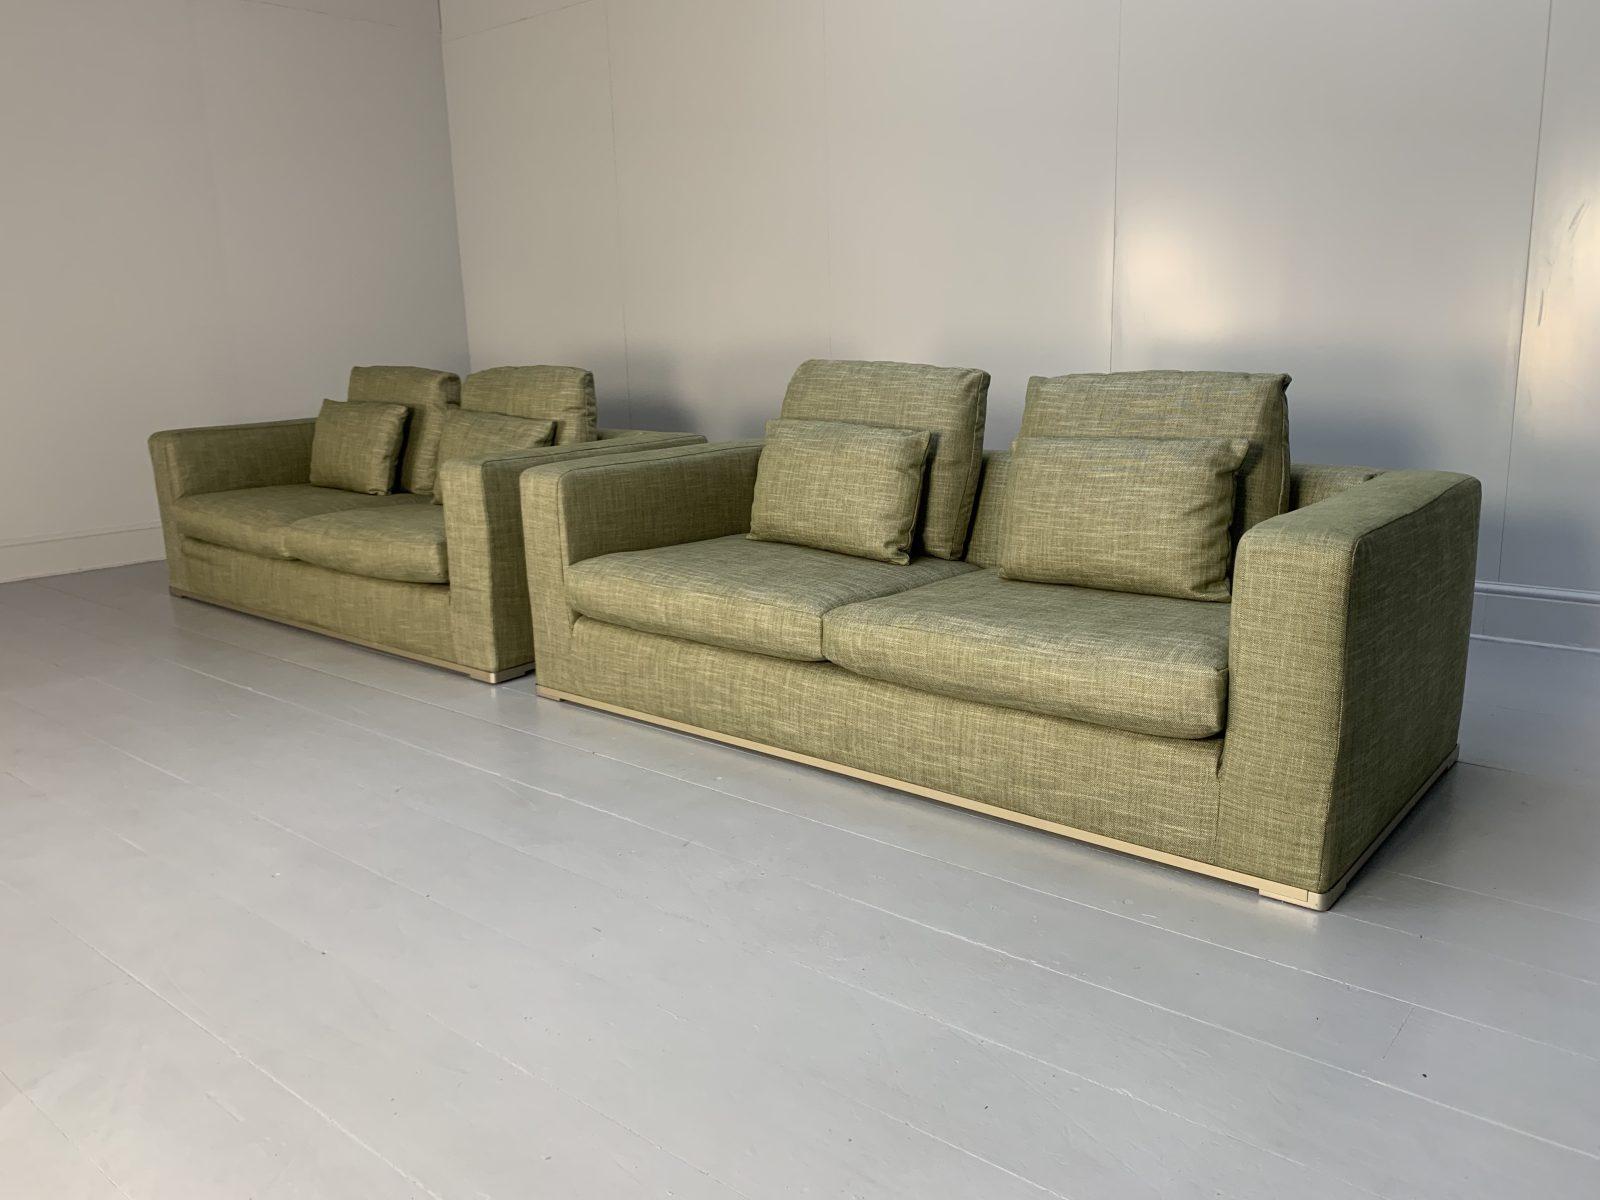 Hello Friends, and welcome to another unmissable offering from Lord Browns Furniture, the UK’s premier resource for fine Sofas and Chairs.

On offer on this occasion is a superb, identical pair of “Omnia 2410” 2.5-seat sofas from the “Maxalto”